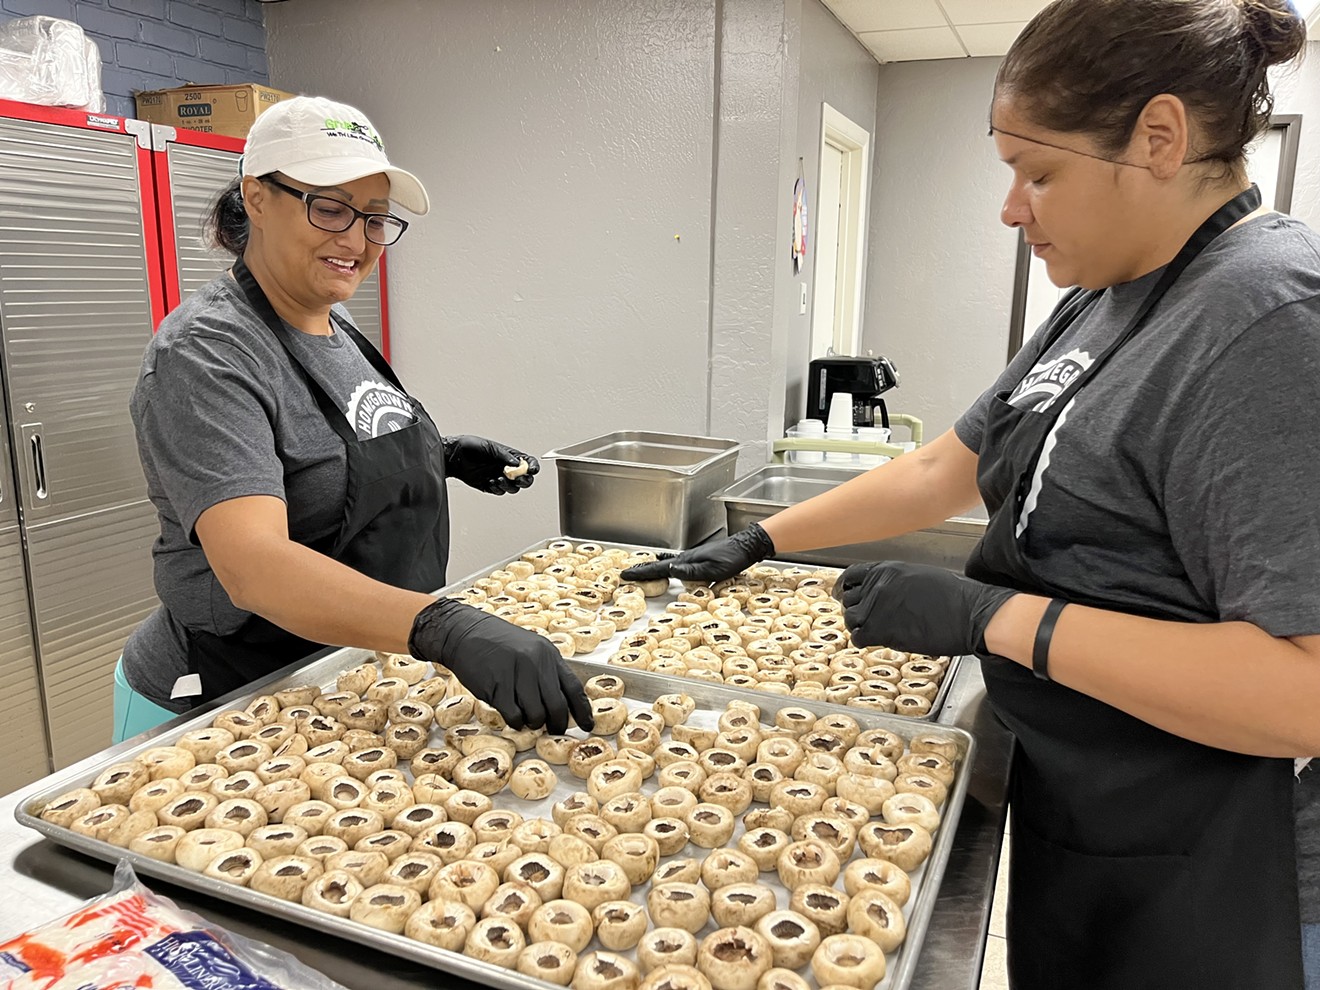 Culinary students Mercedes Sandoval (left) and Sophia Leon prepare mushrooms that will be stuffed with crab and served at the program’s graduation event.